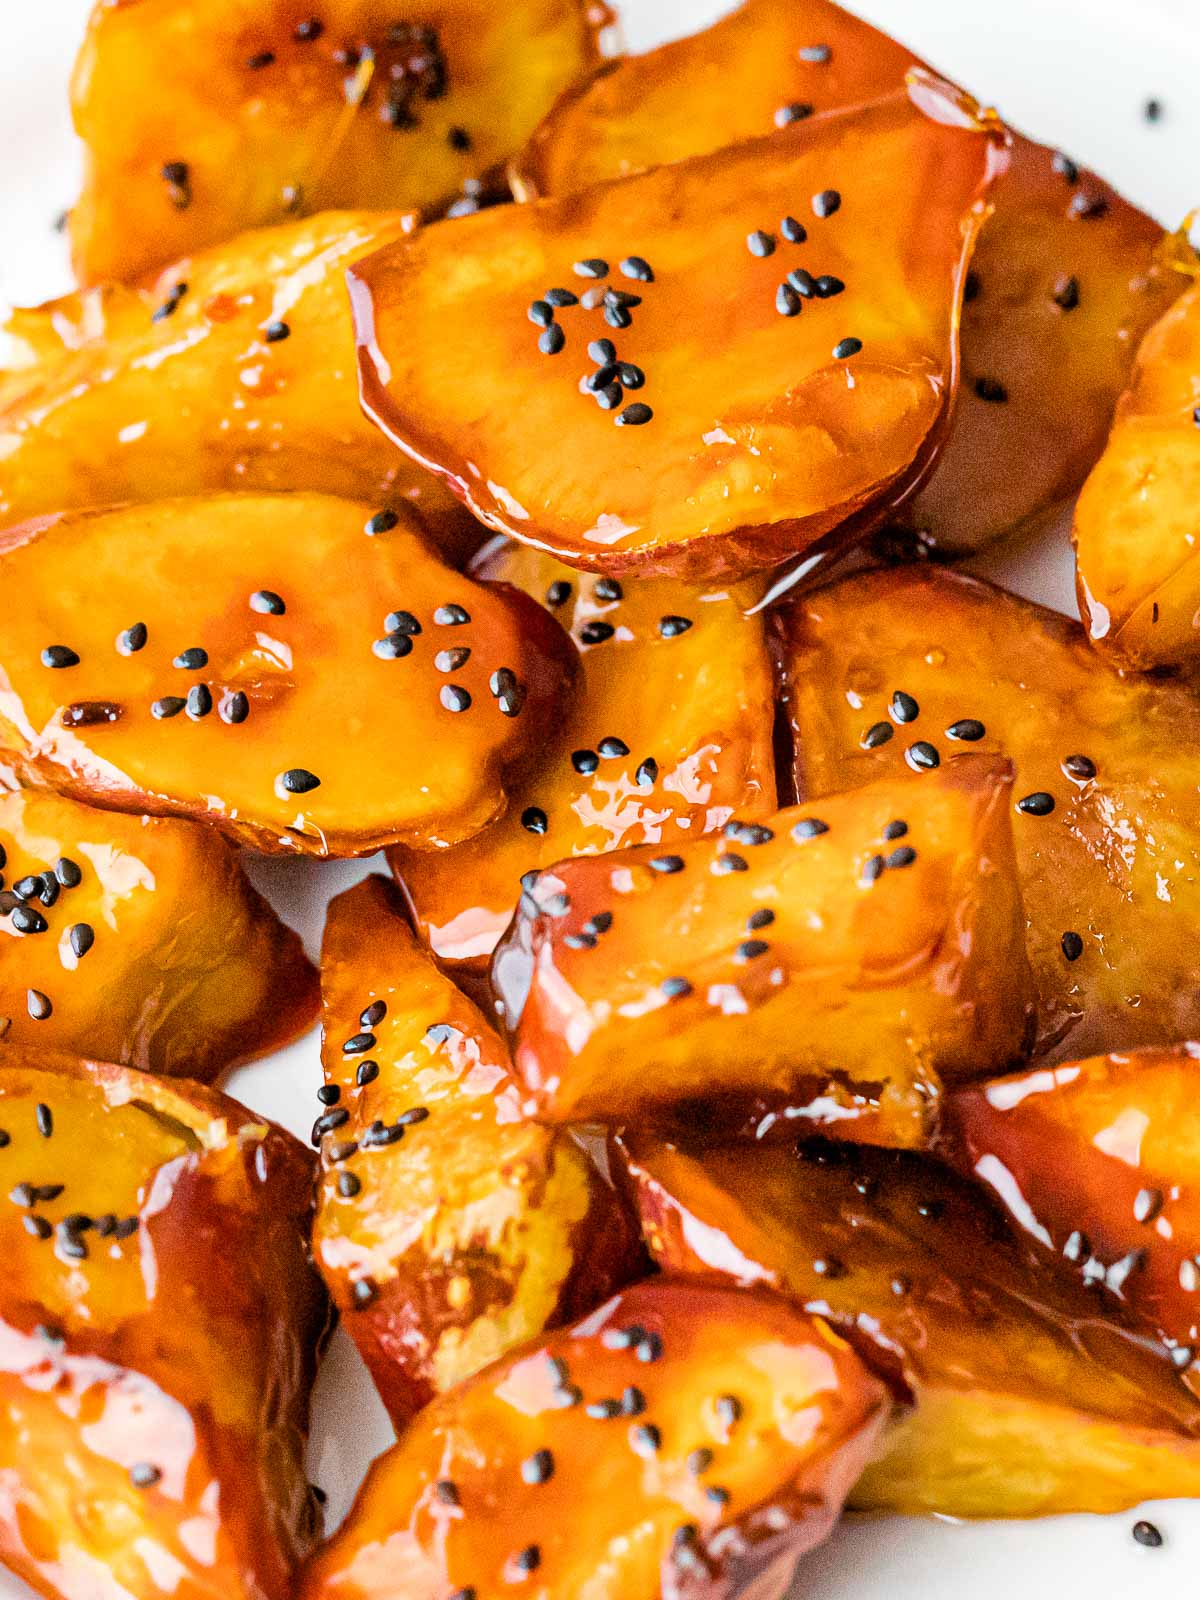 Korean candied sweet potatoes, goguma mattang, covered in golden brown caramel candy and sprinkled with black sesame seeds